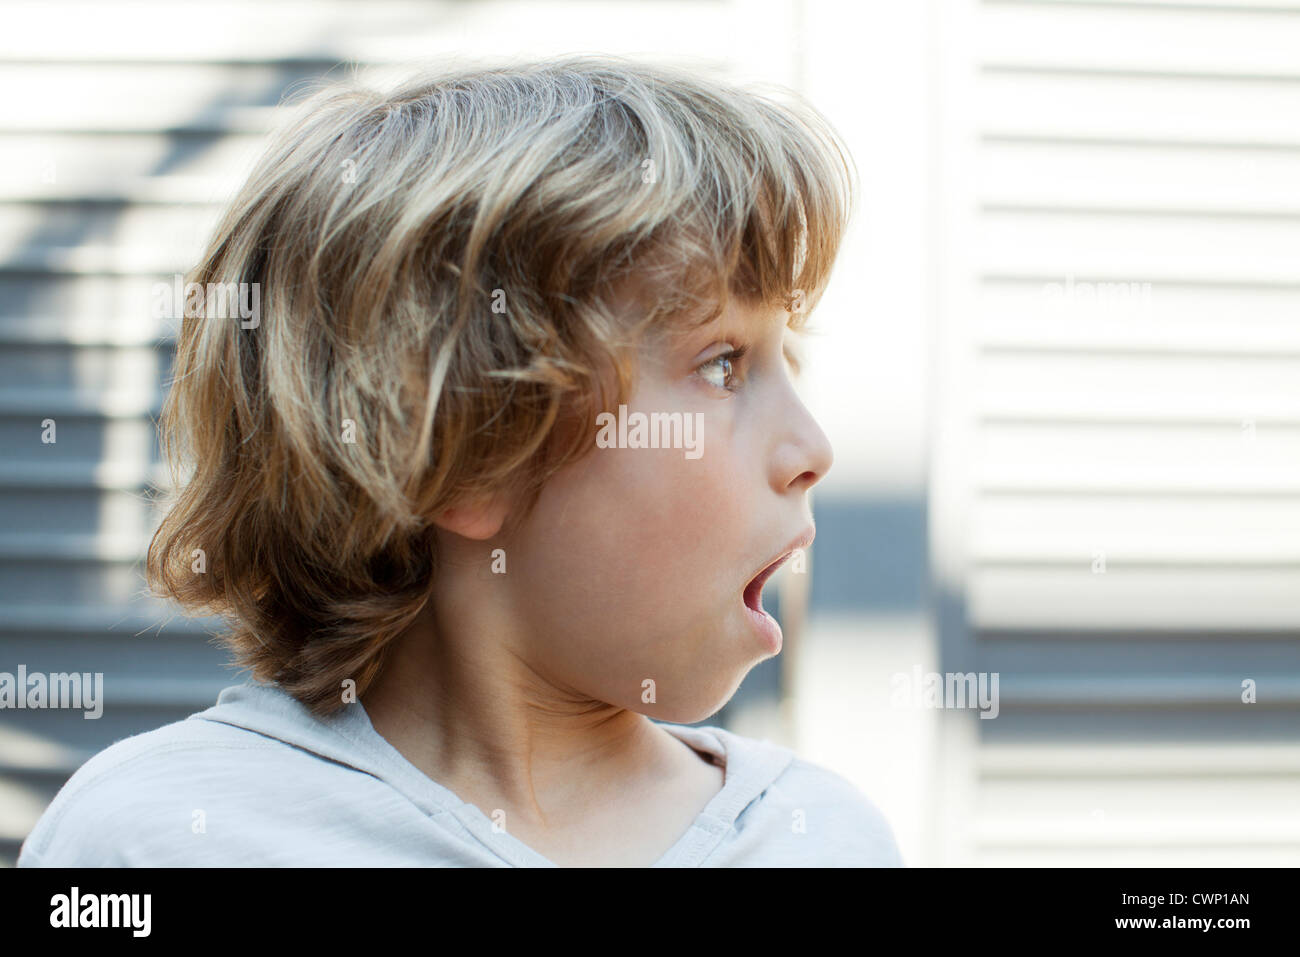 Boy looking away with shocked expression Stock Photo